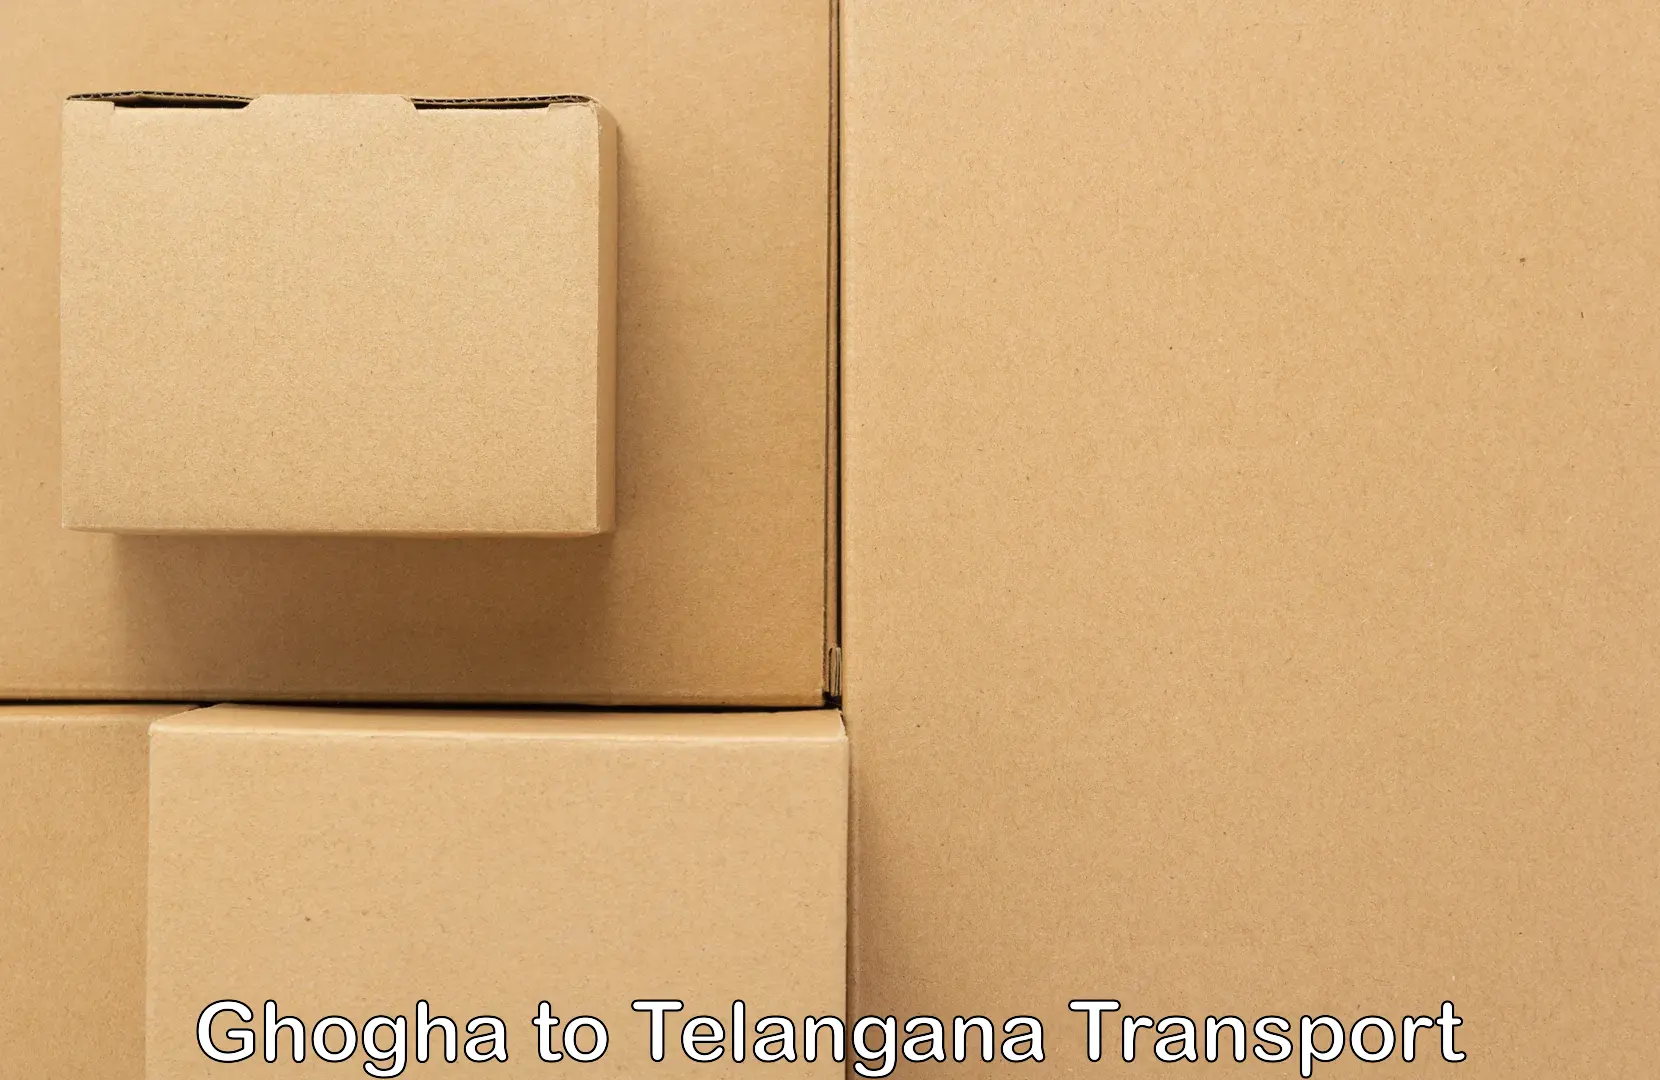 Air cargo transport services in Ghogha to Narmetta